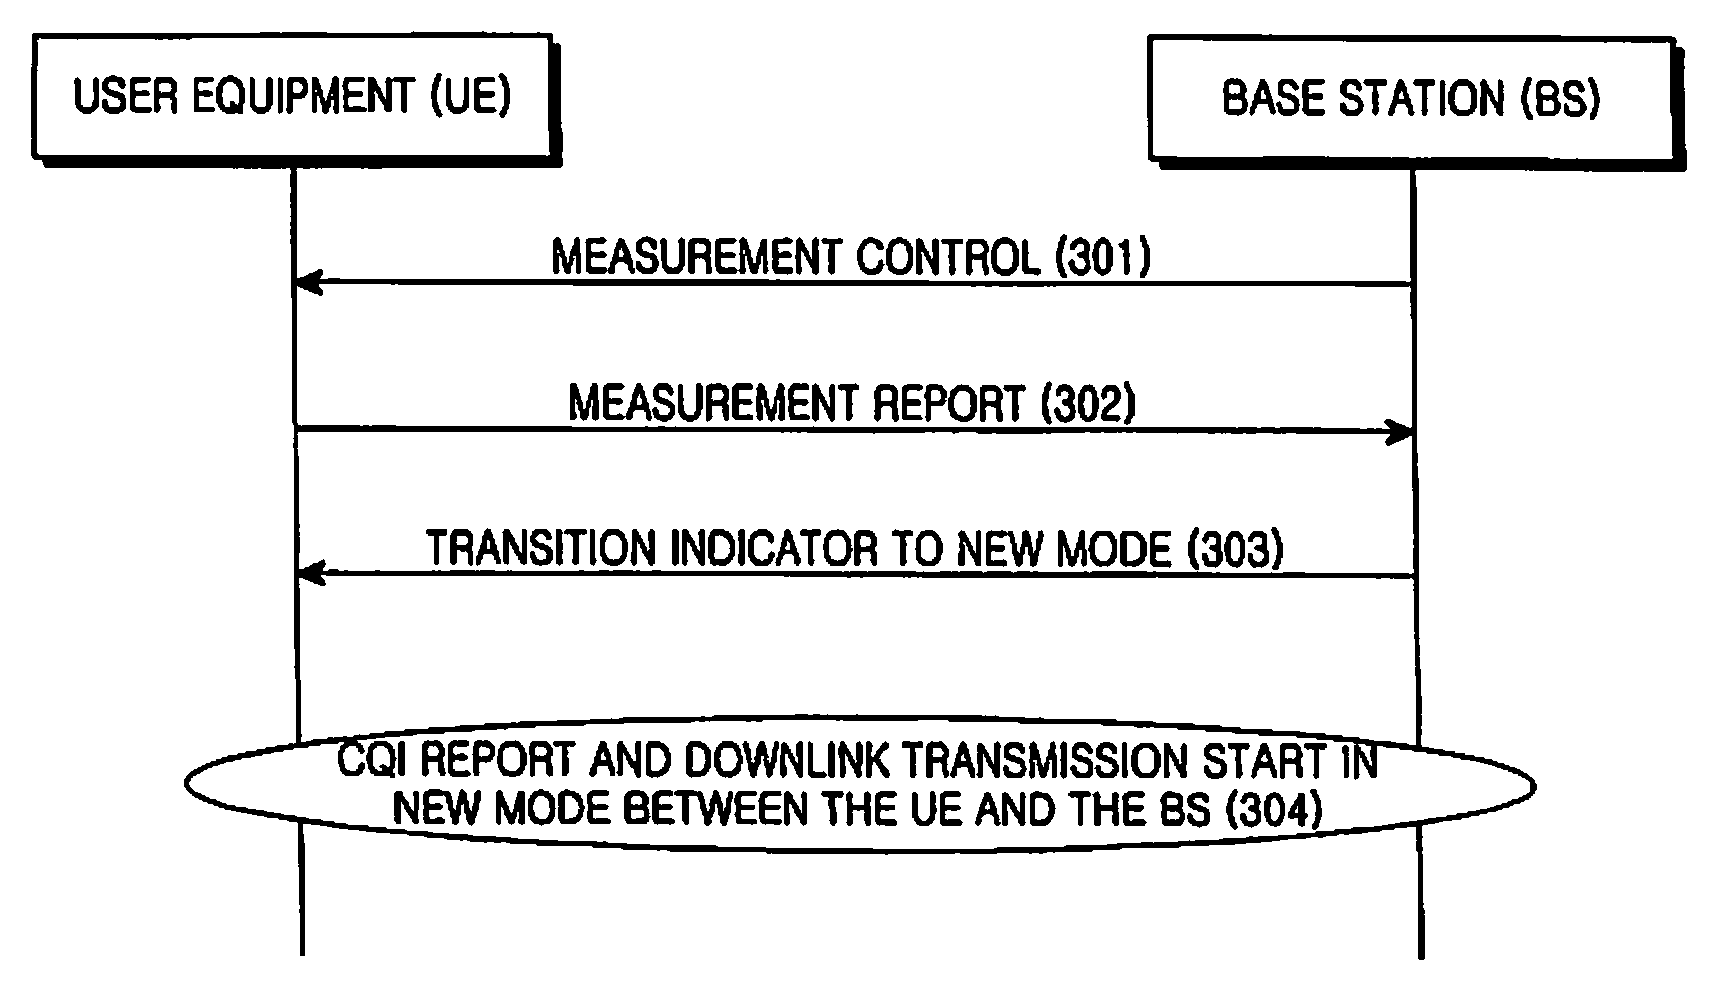 Method for transition between distributed transmission and localized transmission